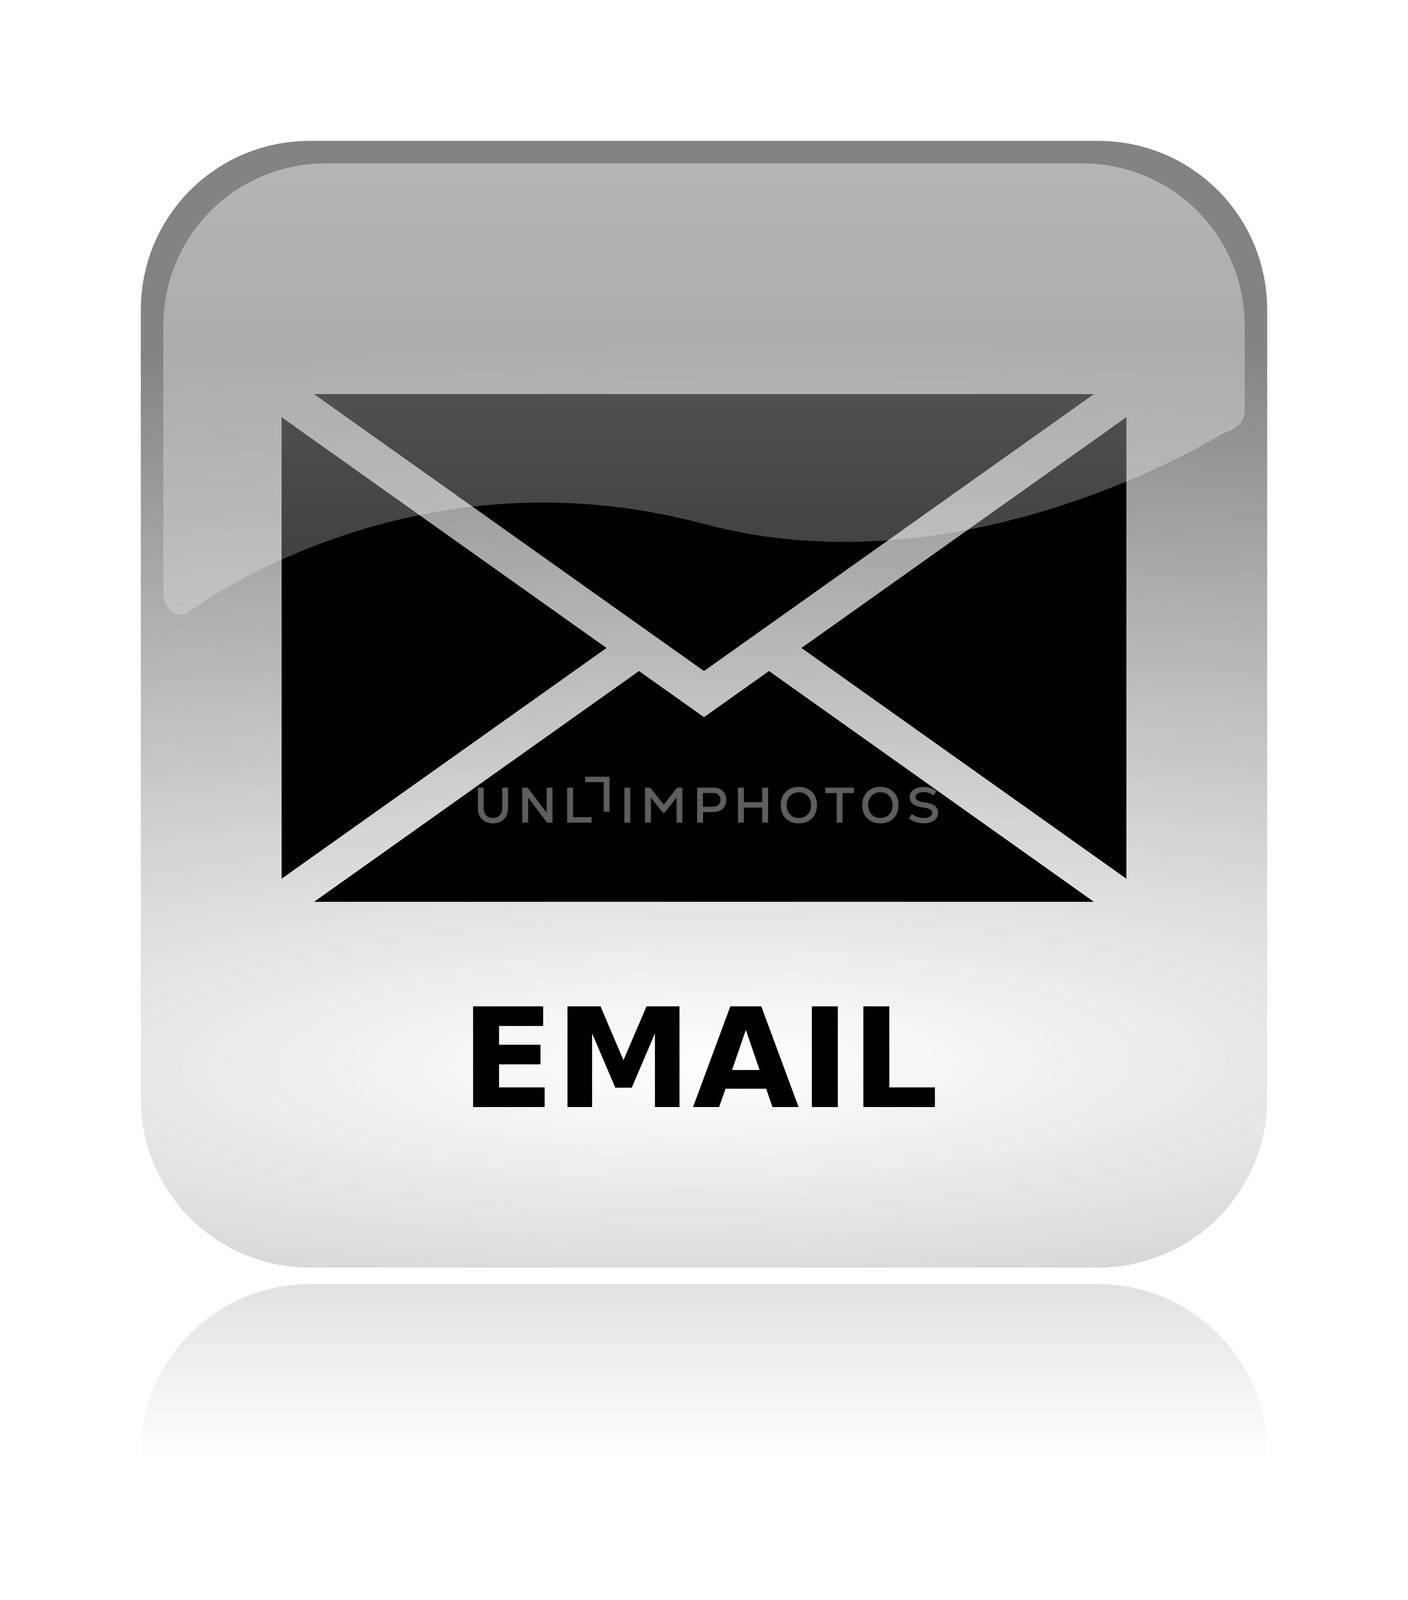 Email envelope white, transparent and glossy web interface icon with reflection